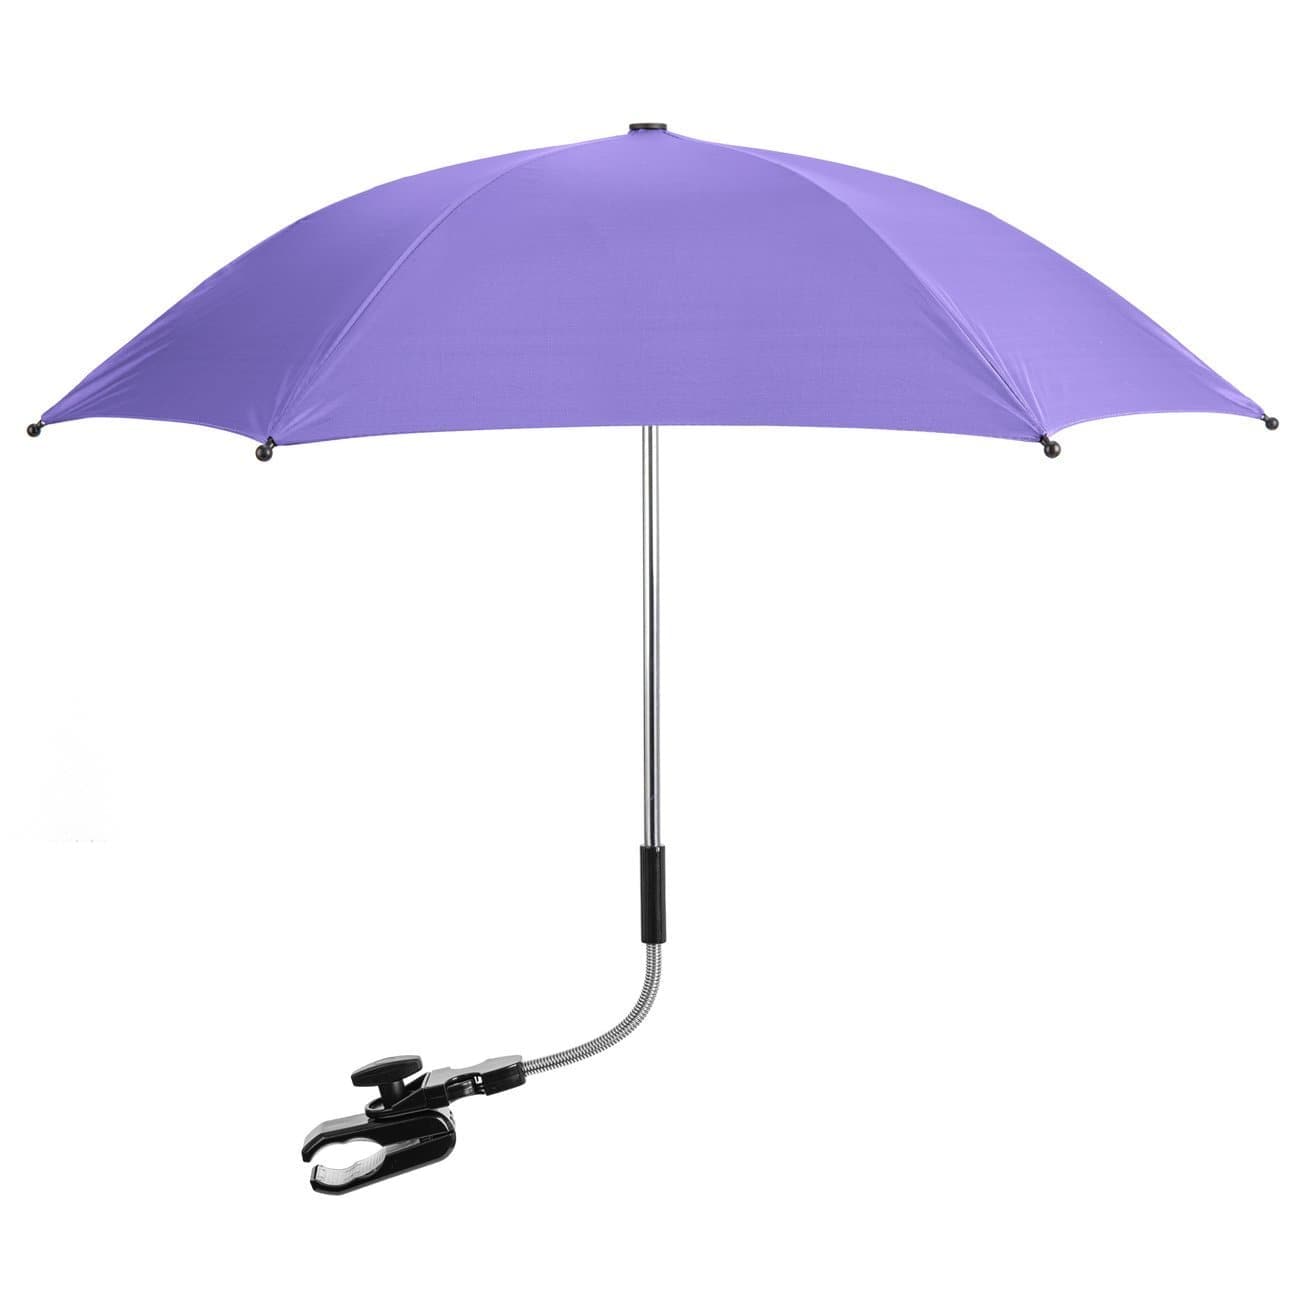 Baby Parasol Compatible With Kiddicare - Fits All Models - For Your Little One